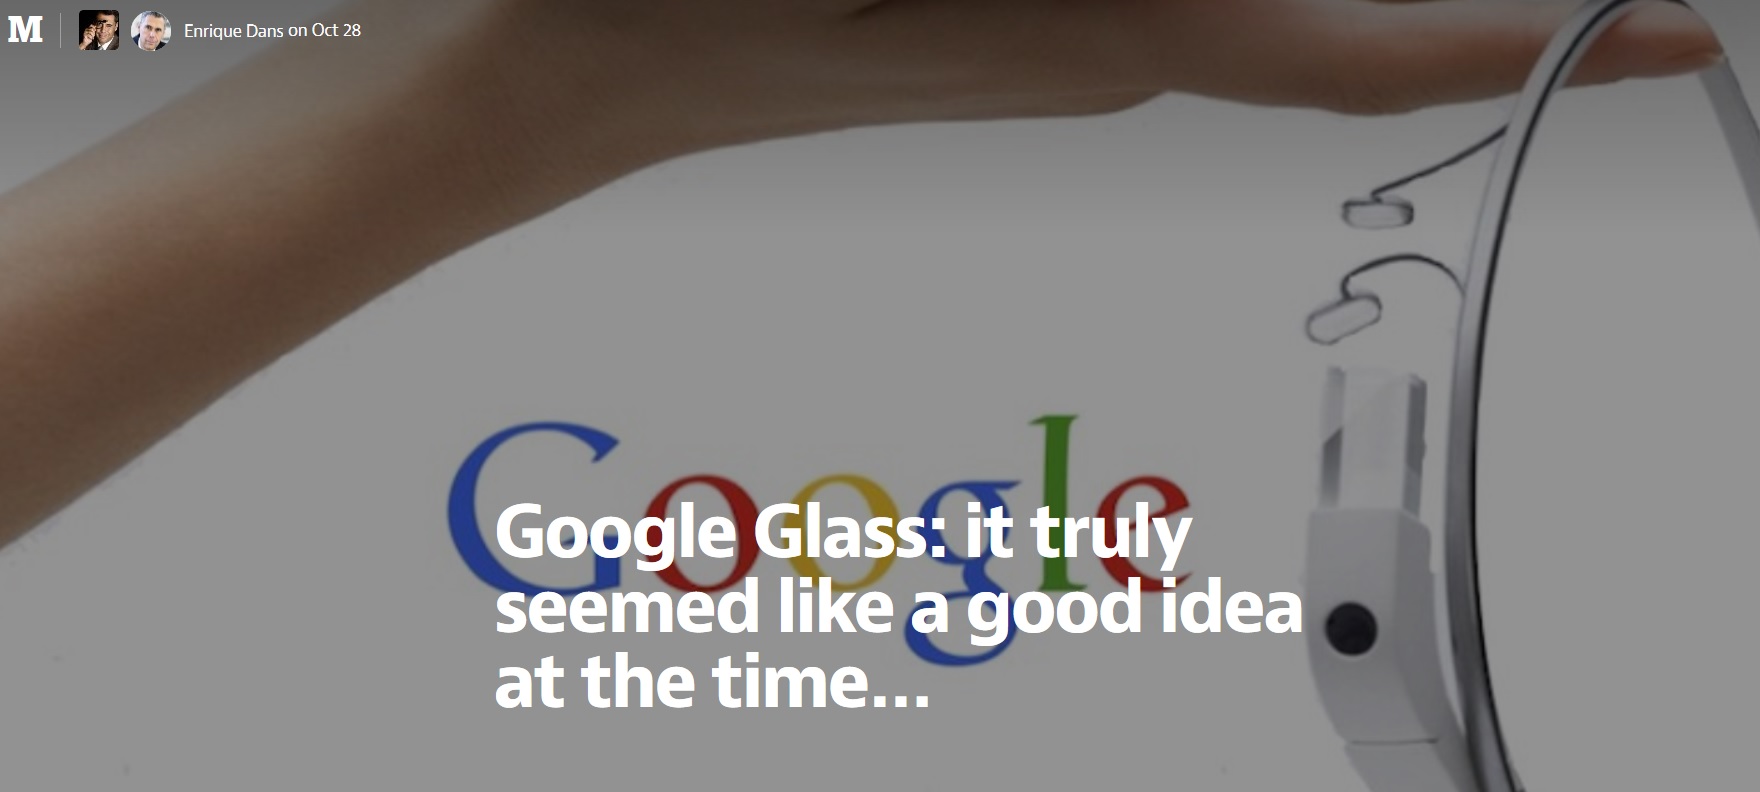 Google Glass: it truly seemed like a good idea at the time…